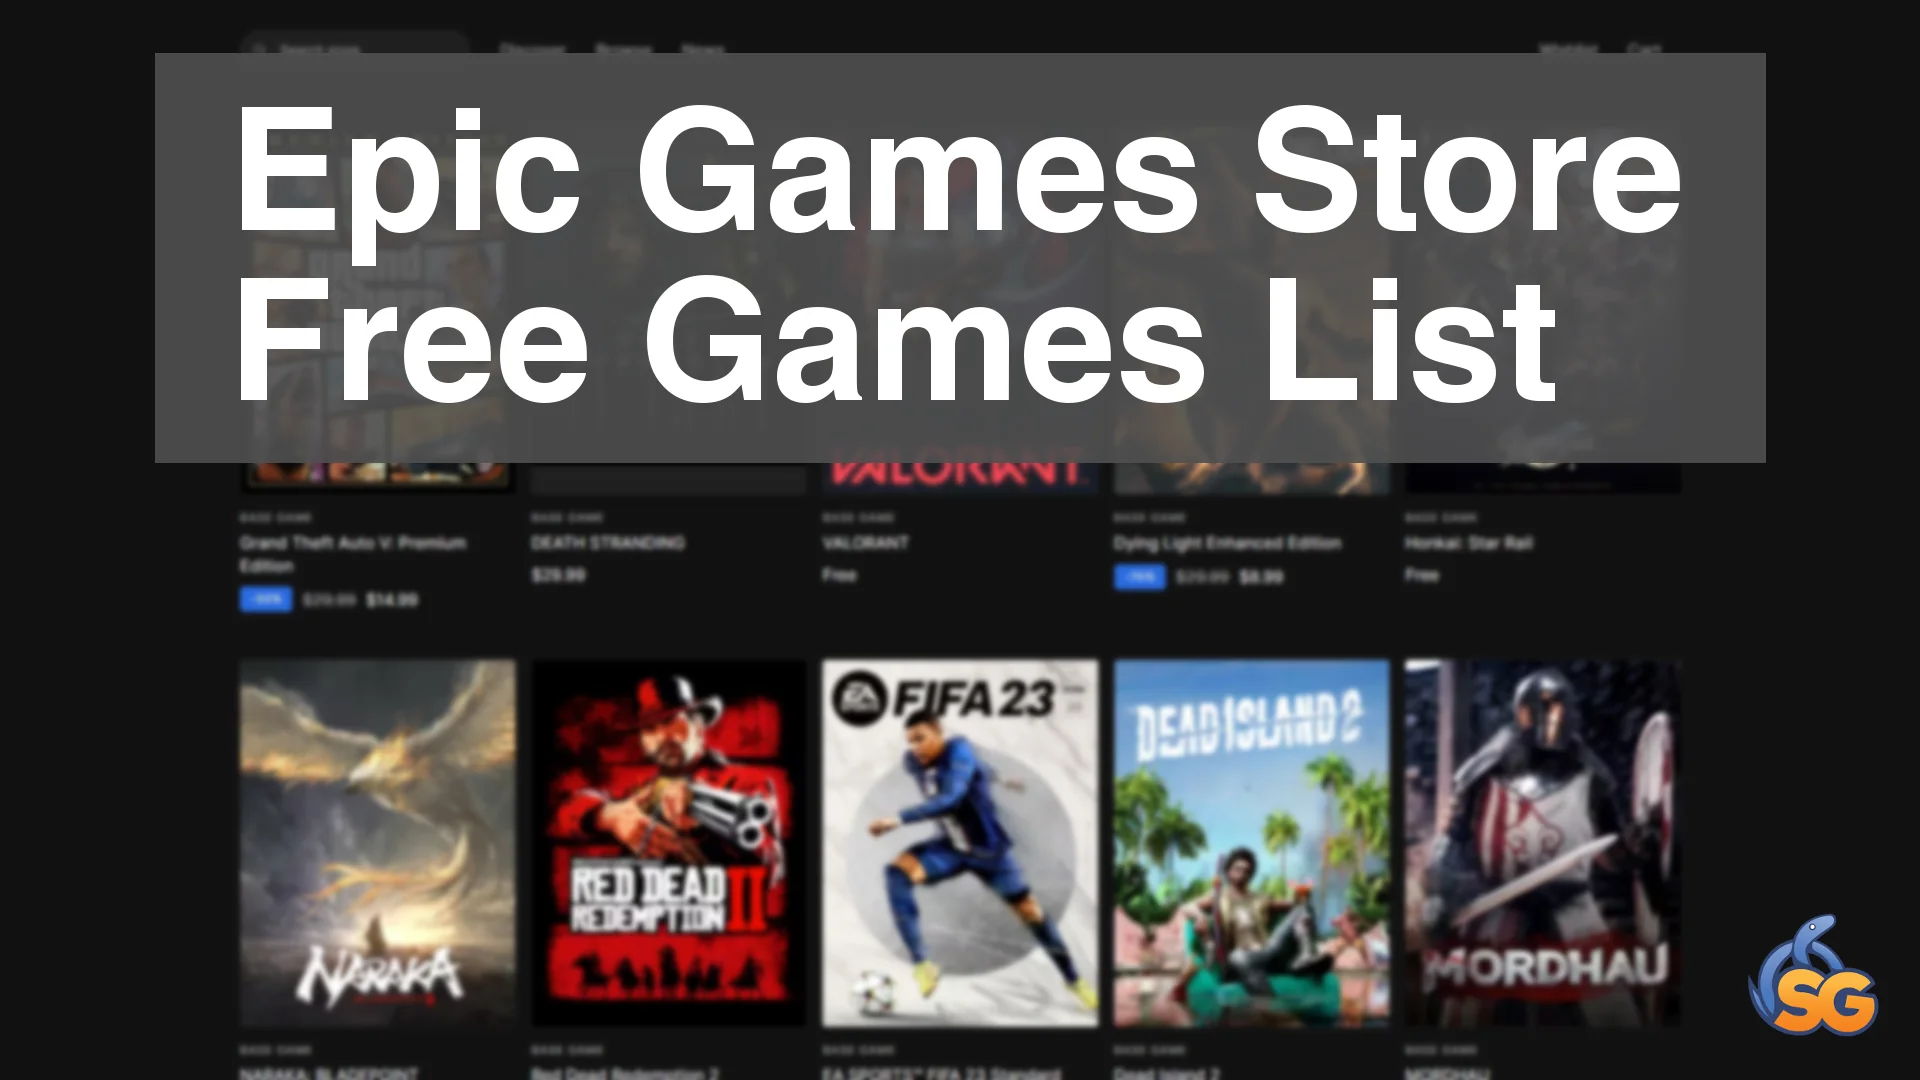 Epic Games Offering 2 New Free Games Until July 2nd